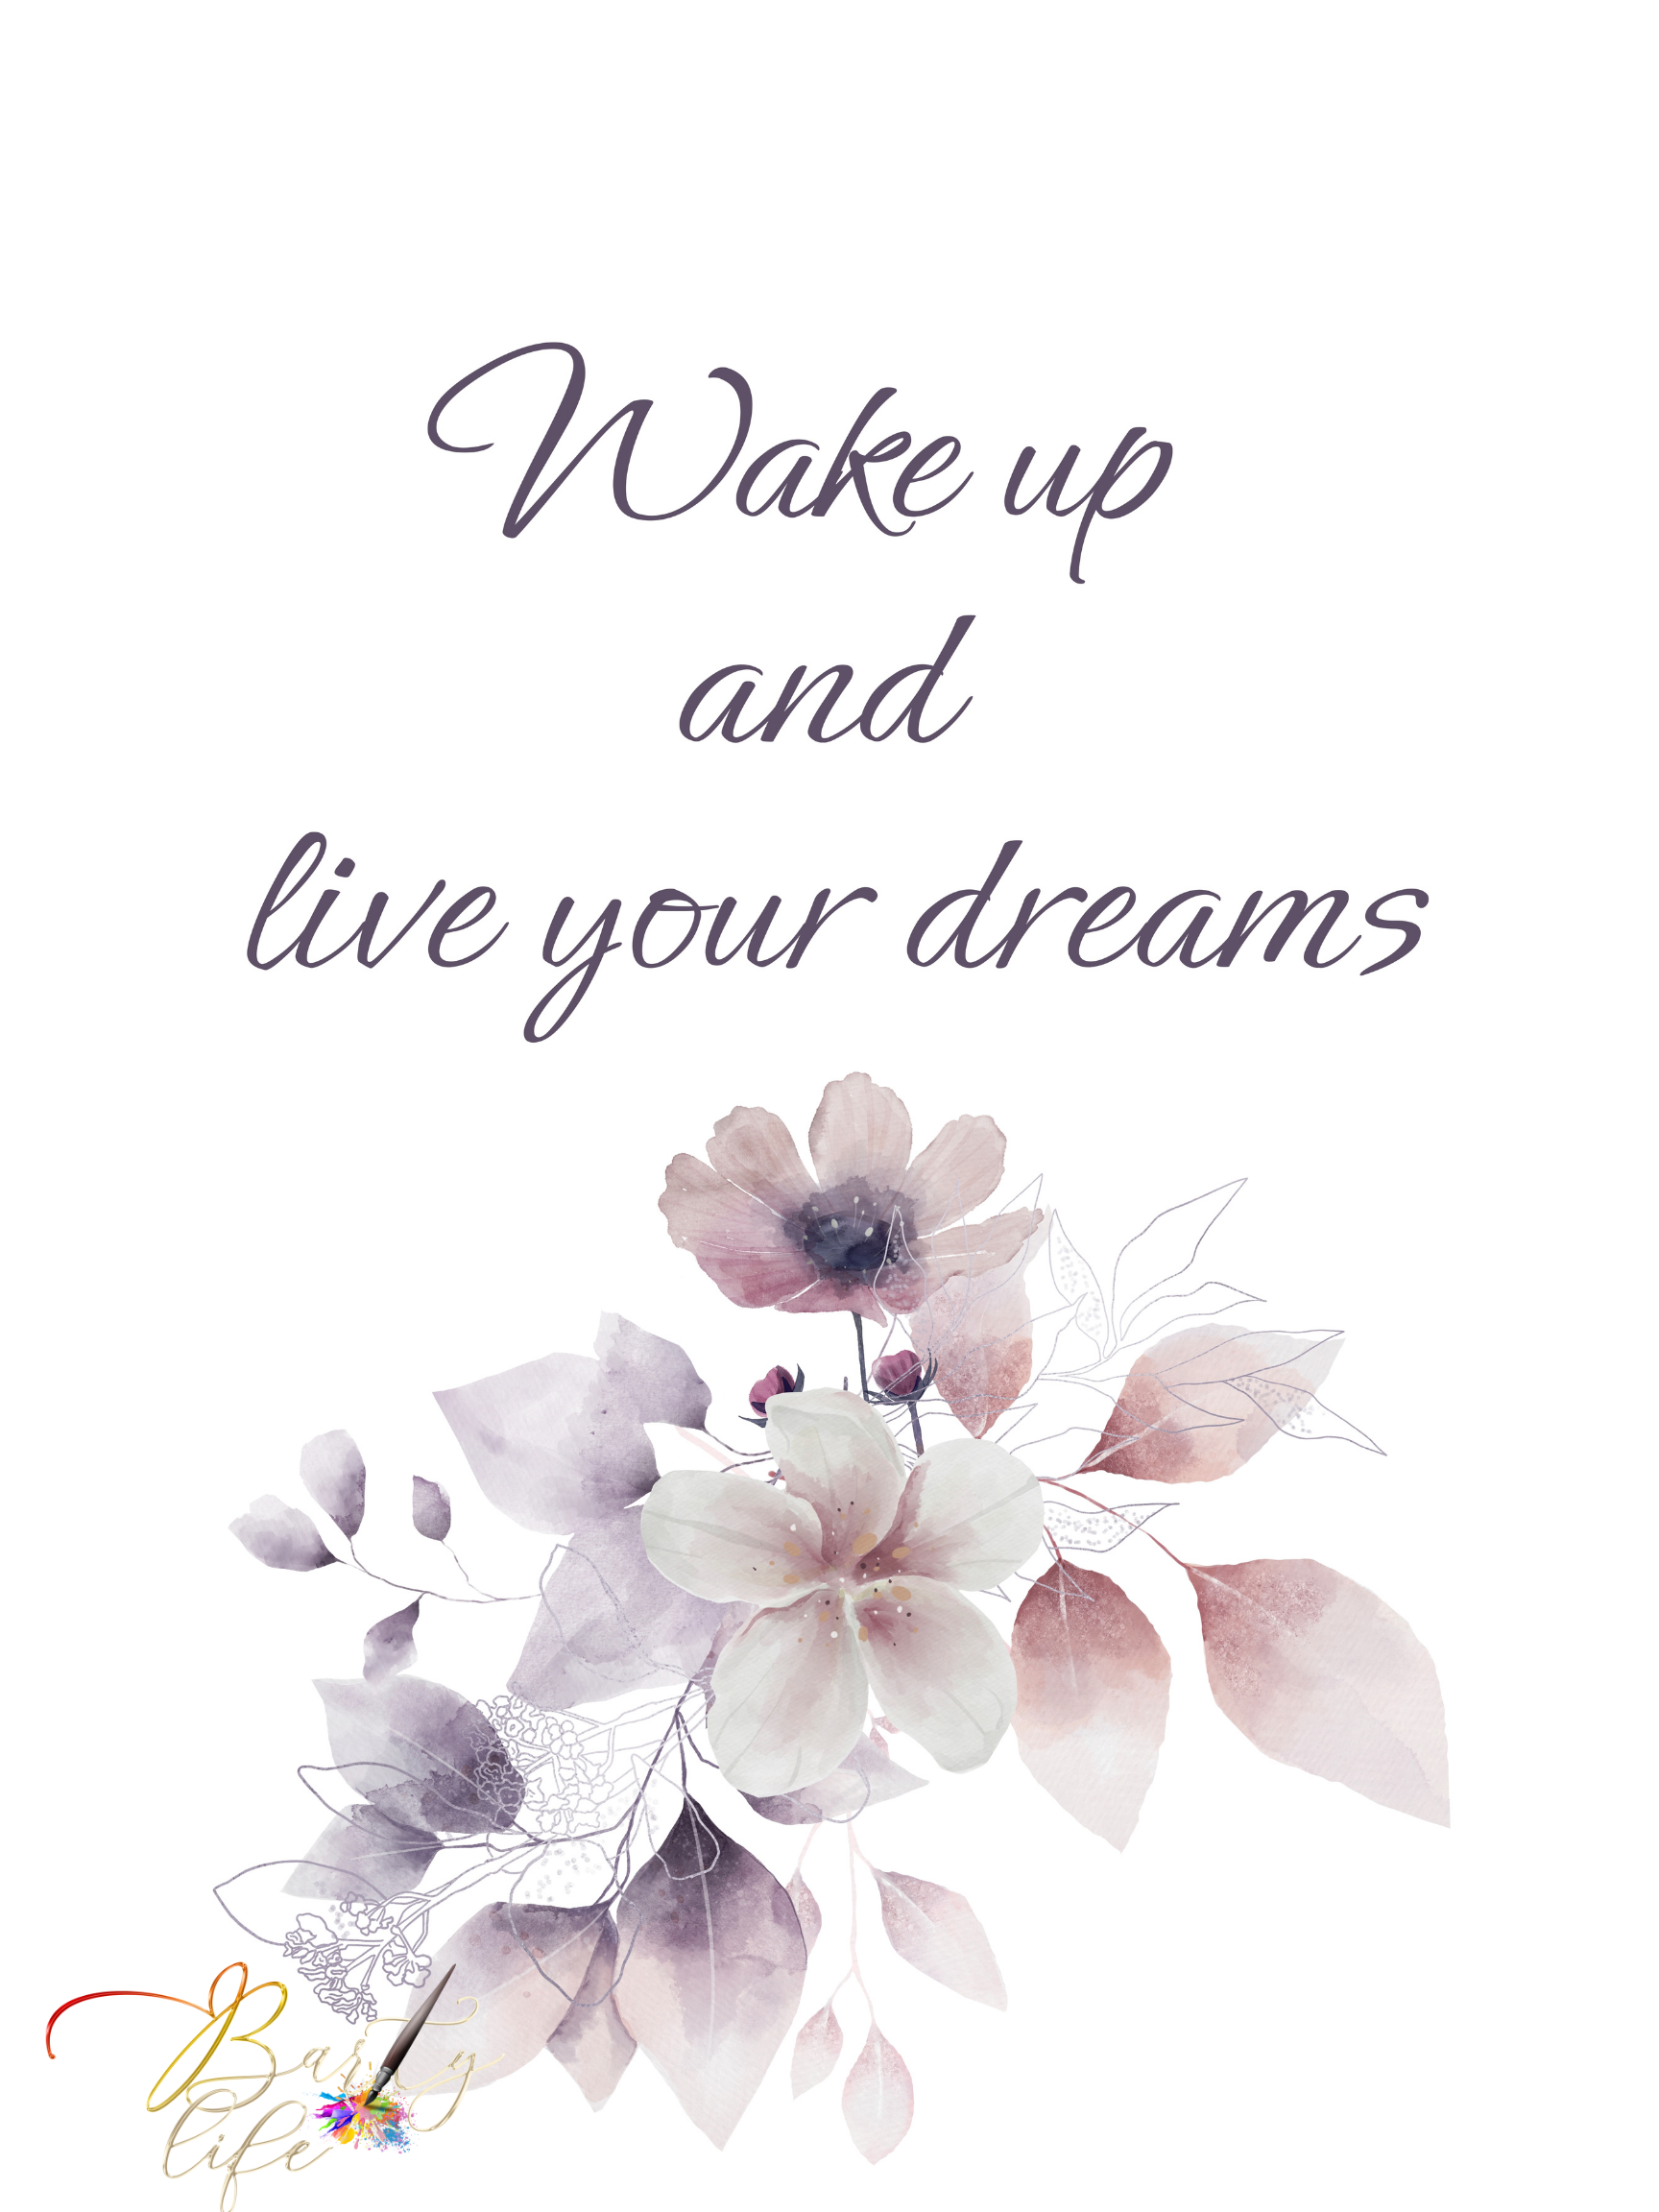 Wake Up And Live Your Dreams - Wall Art Barty life